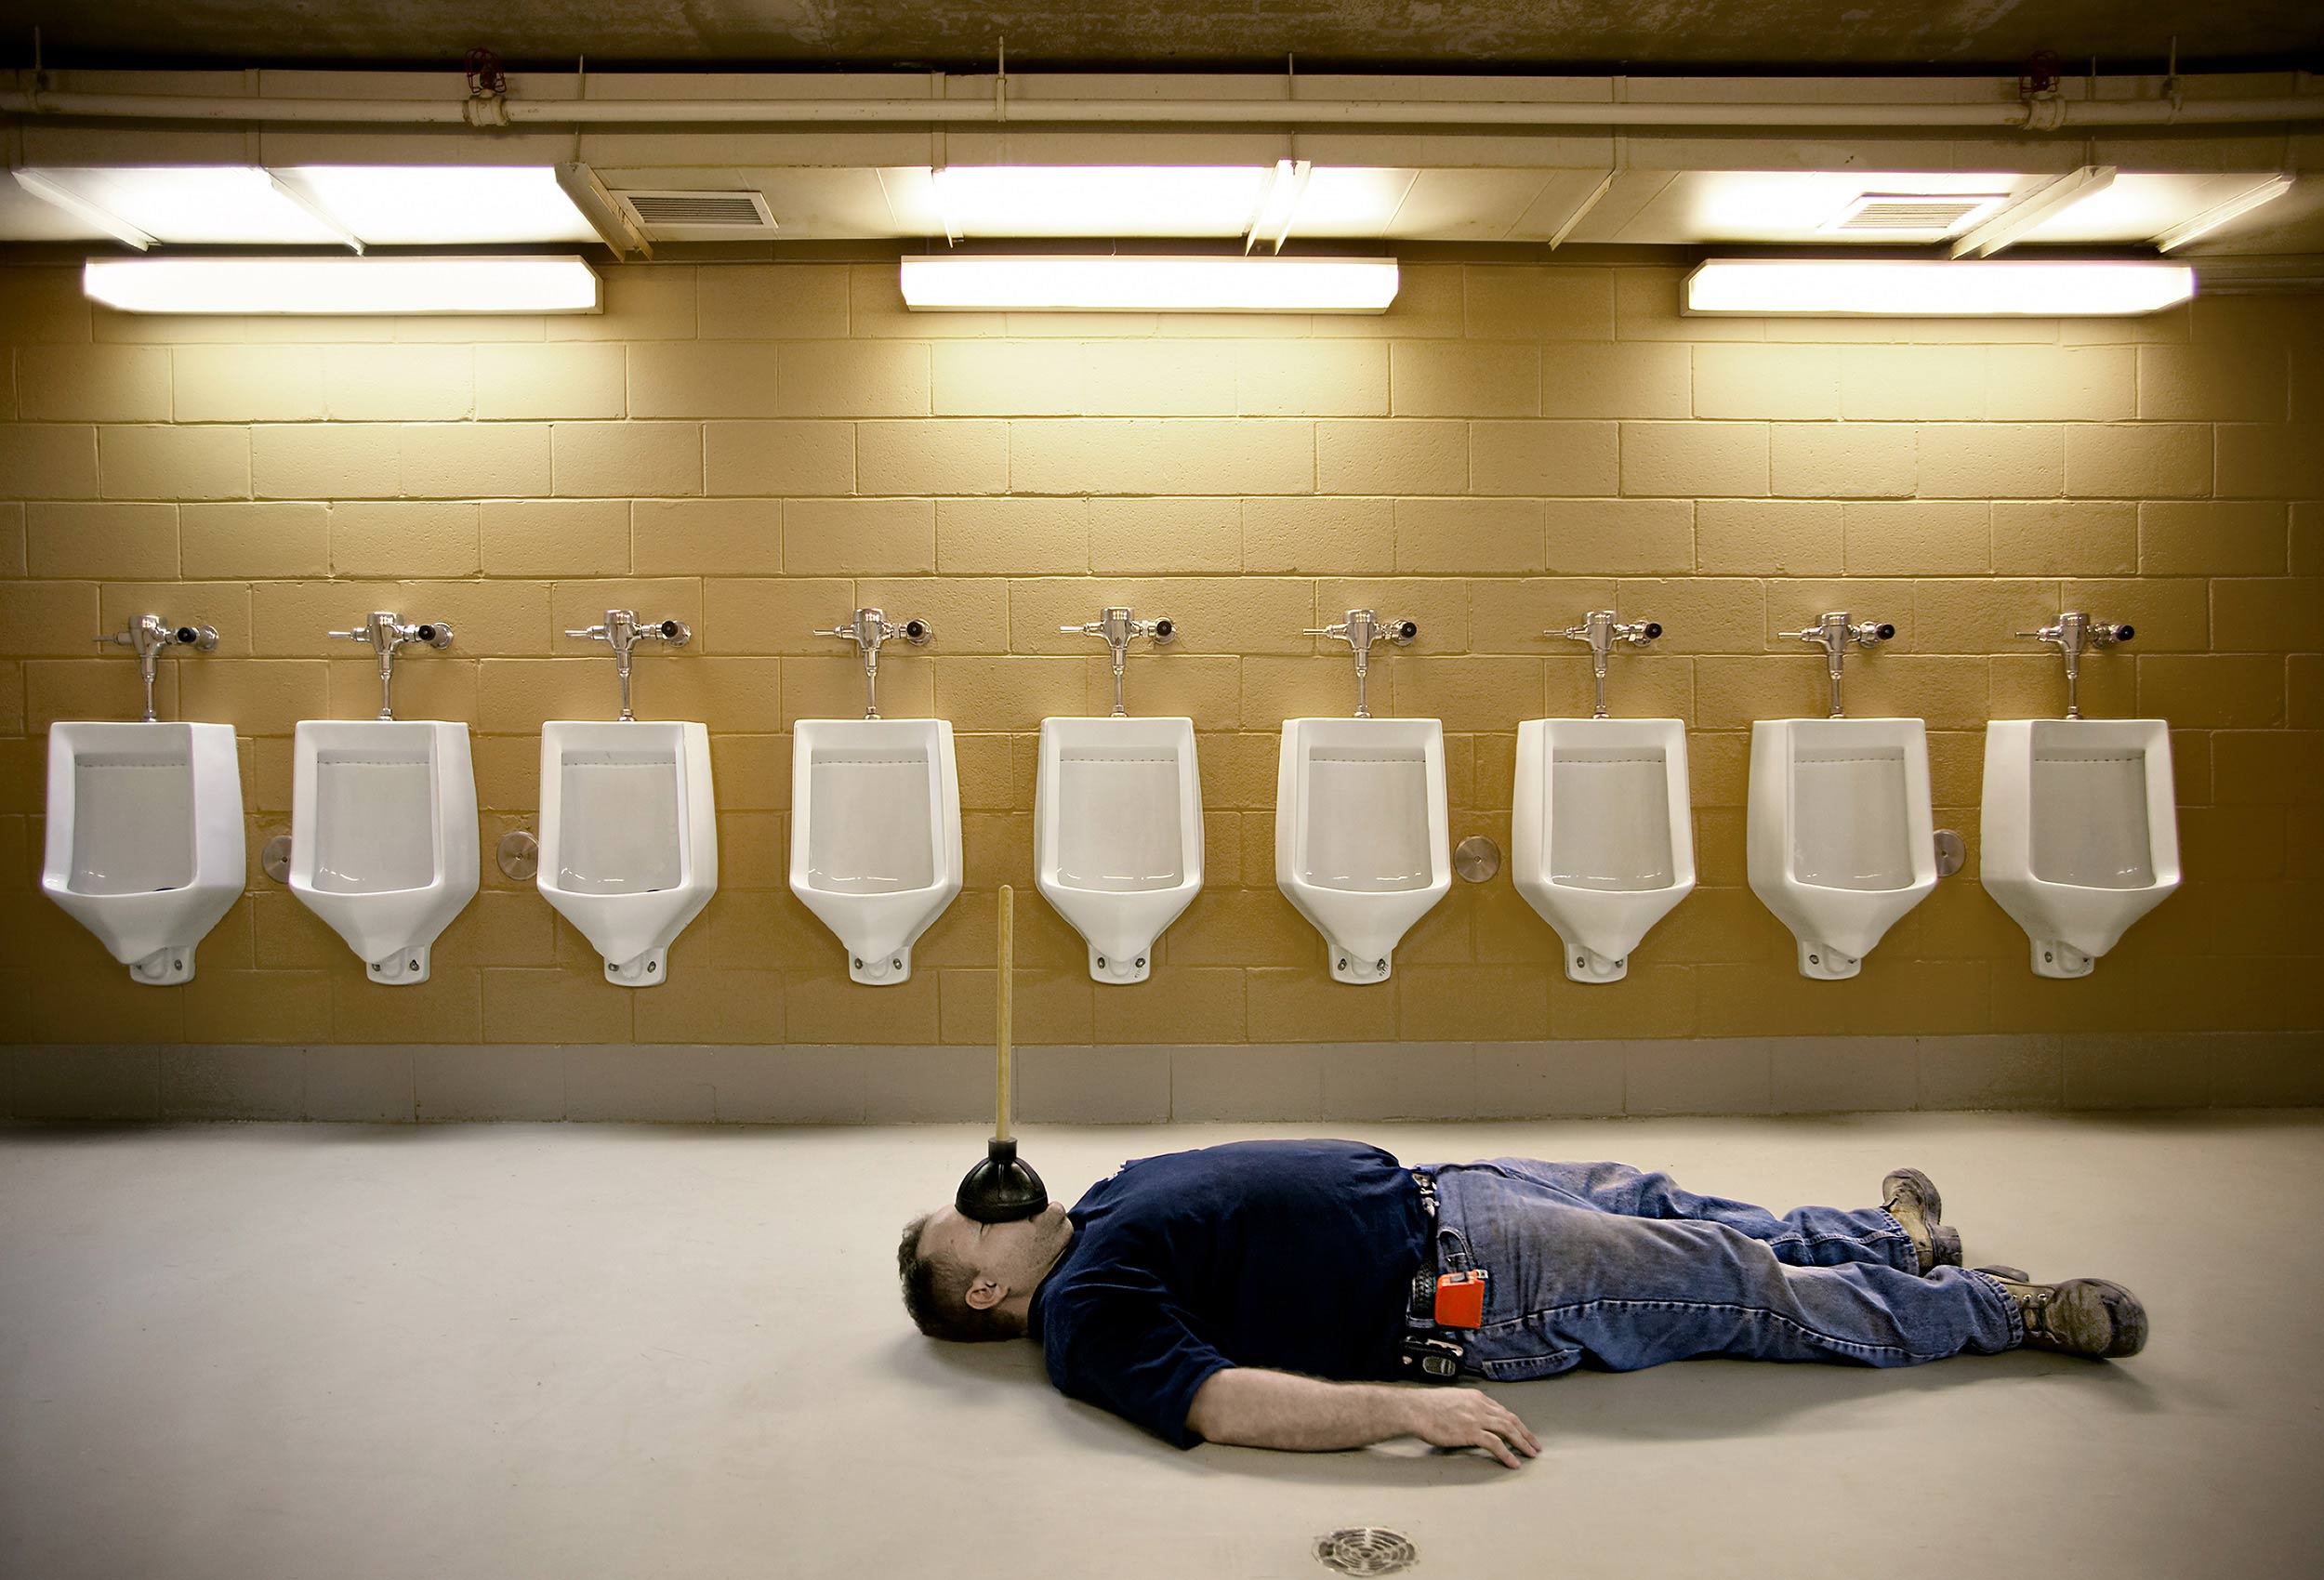  a toronto plumber pretends to be dead in front of urinals at the rogers centre